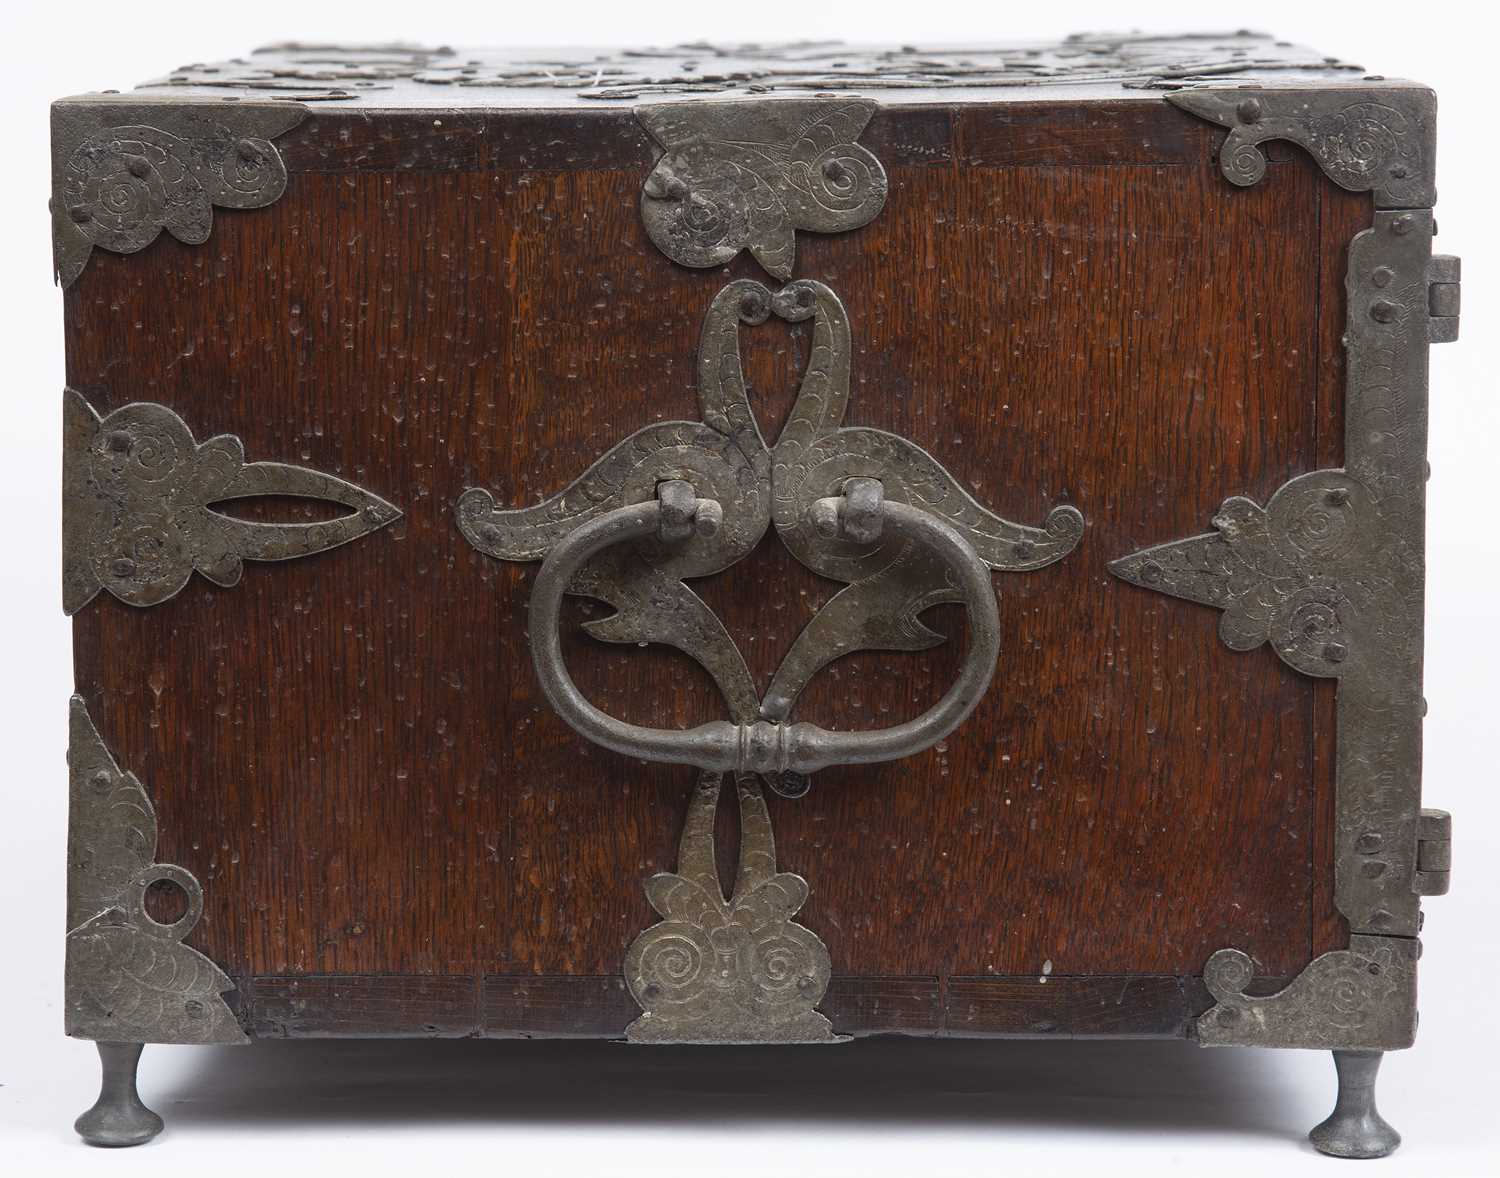 A 17th century German oak and metal bound table top cabinet of drawers, having a double headed eagle - Image 8 of 10